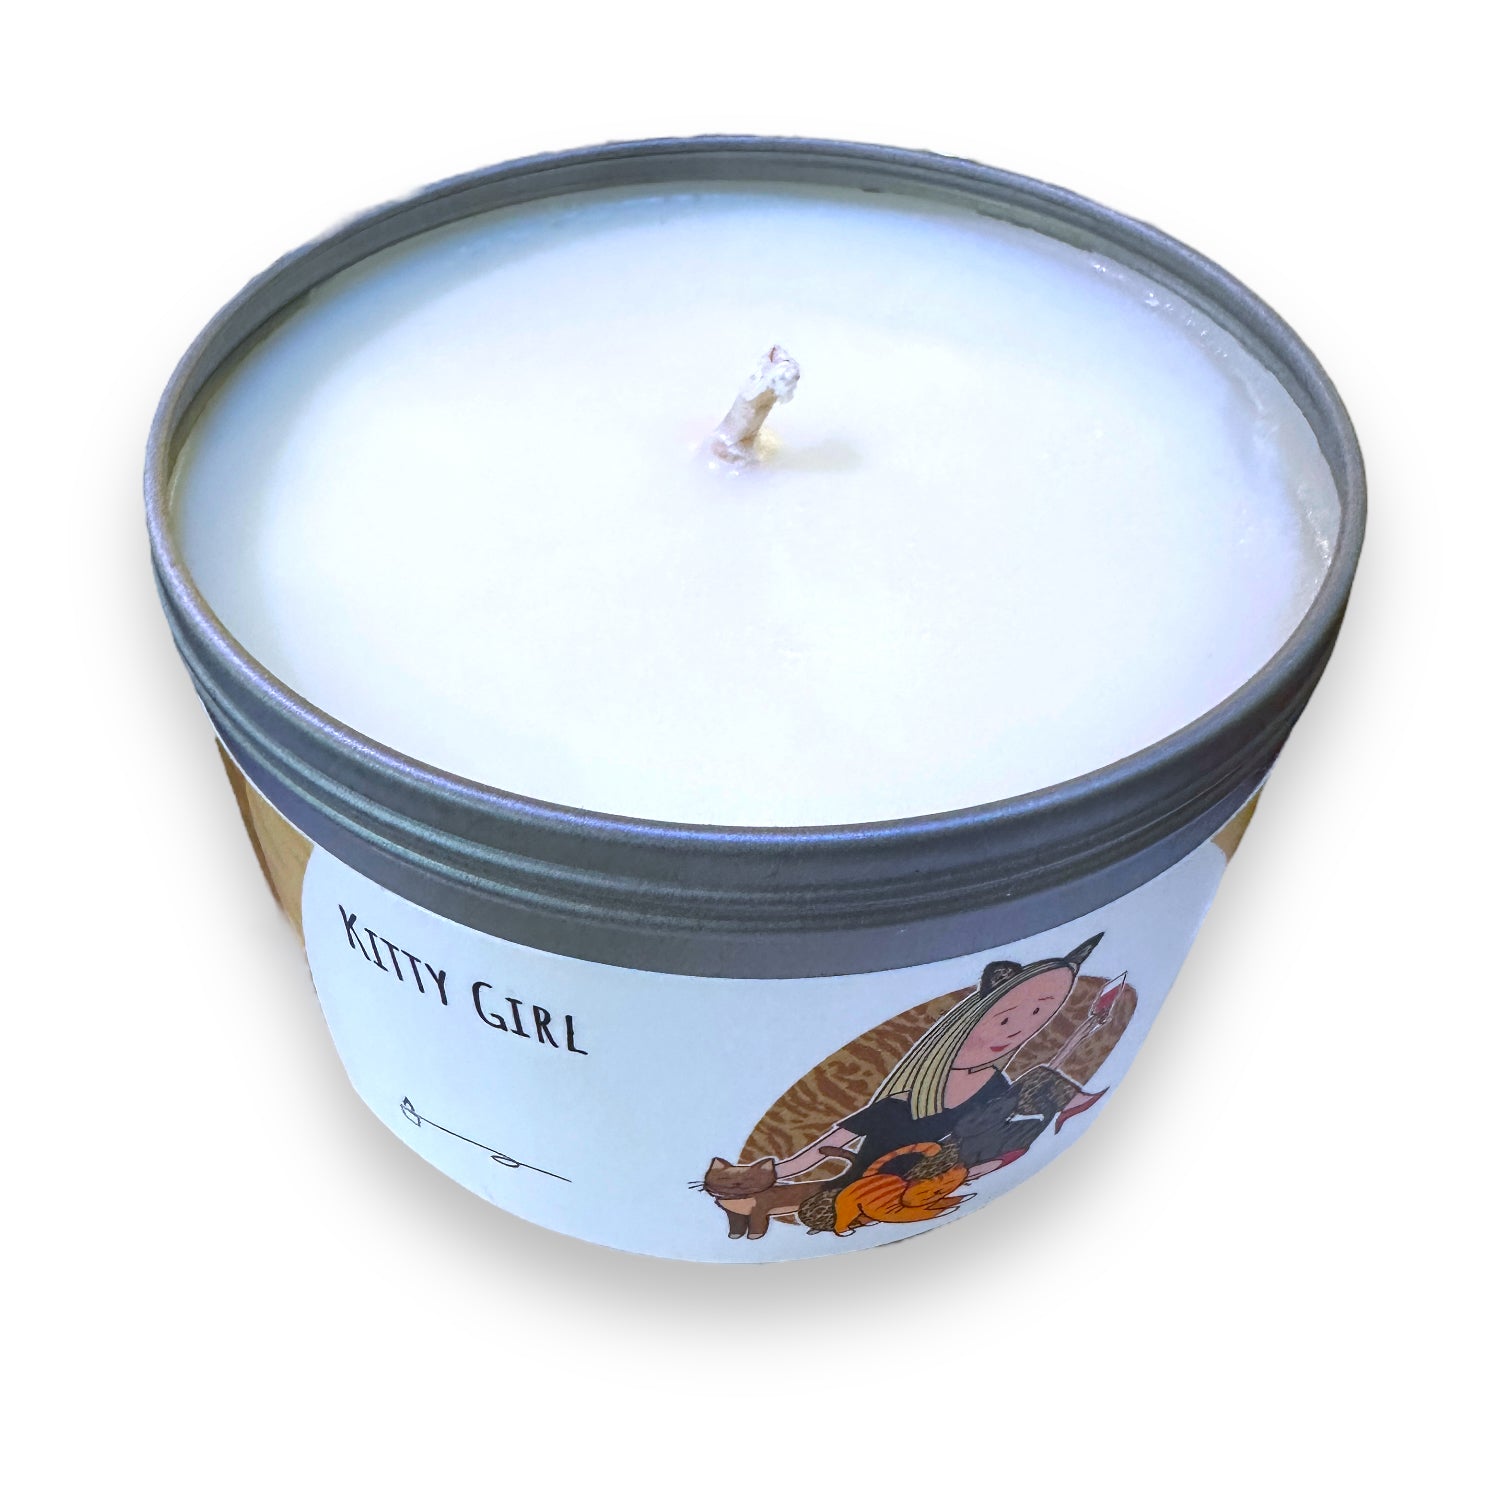 Kitty Girl Candle - Pear, Agave, Musk and Amber - 16-oz - Mellow Monkey